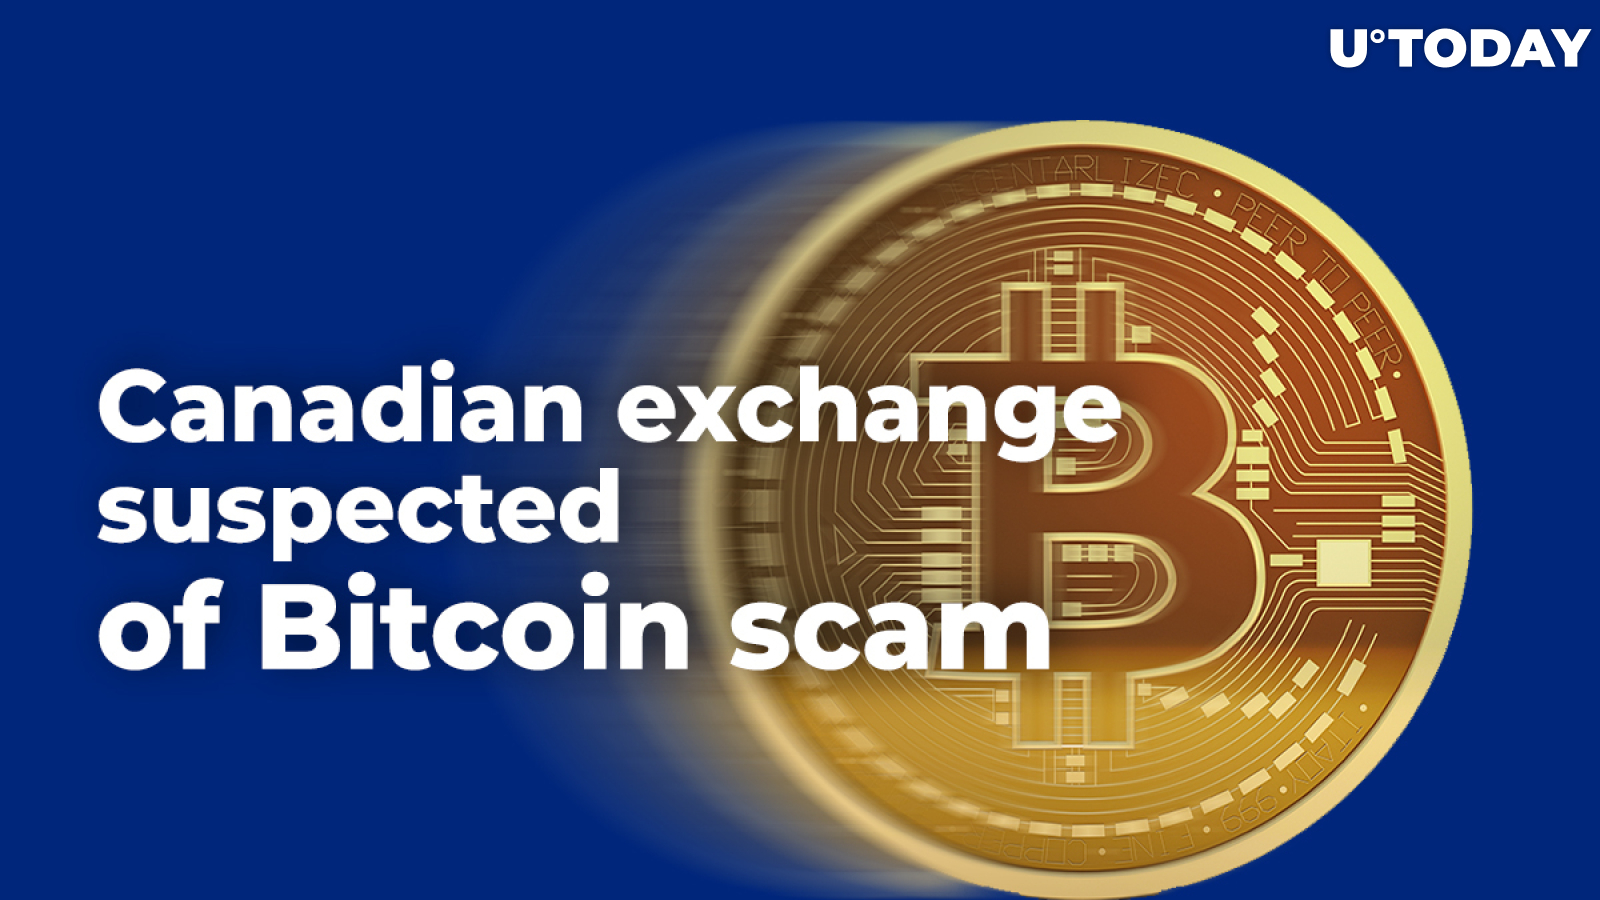 Goodbye Bitcoin: One More Canada’s Crypto Exchange Bogarts Its Clients’ BTC